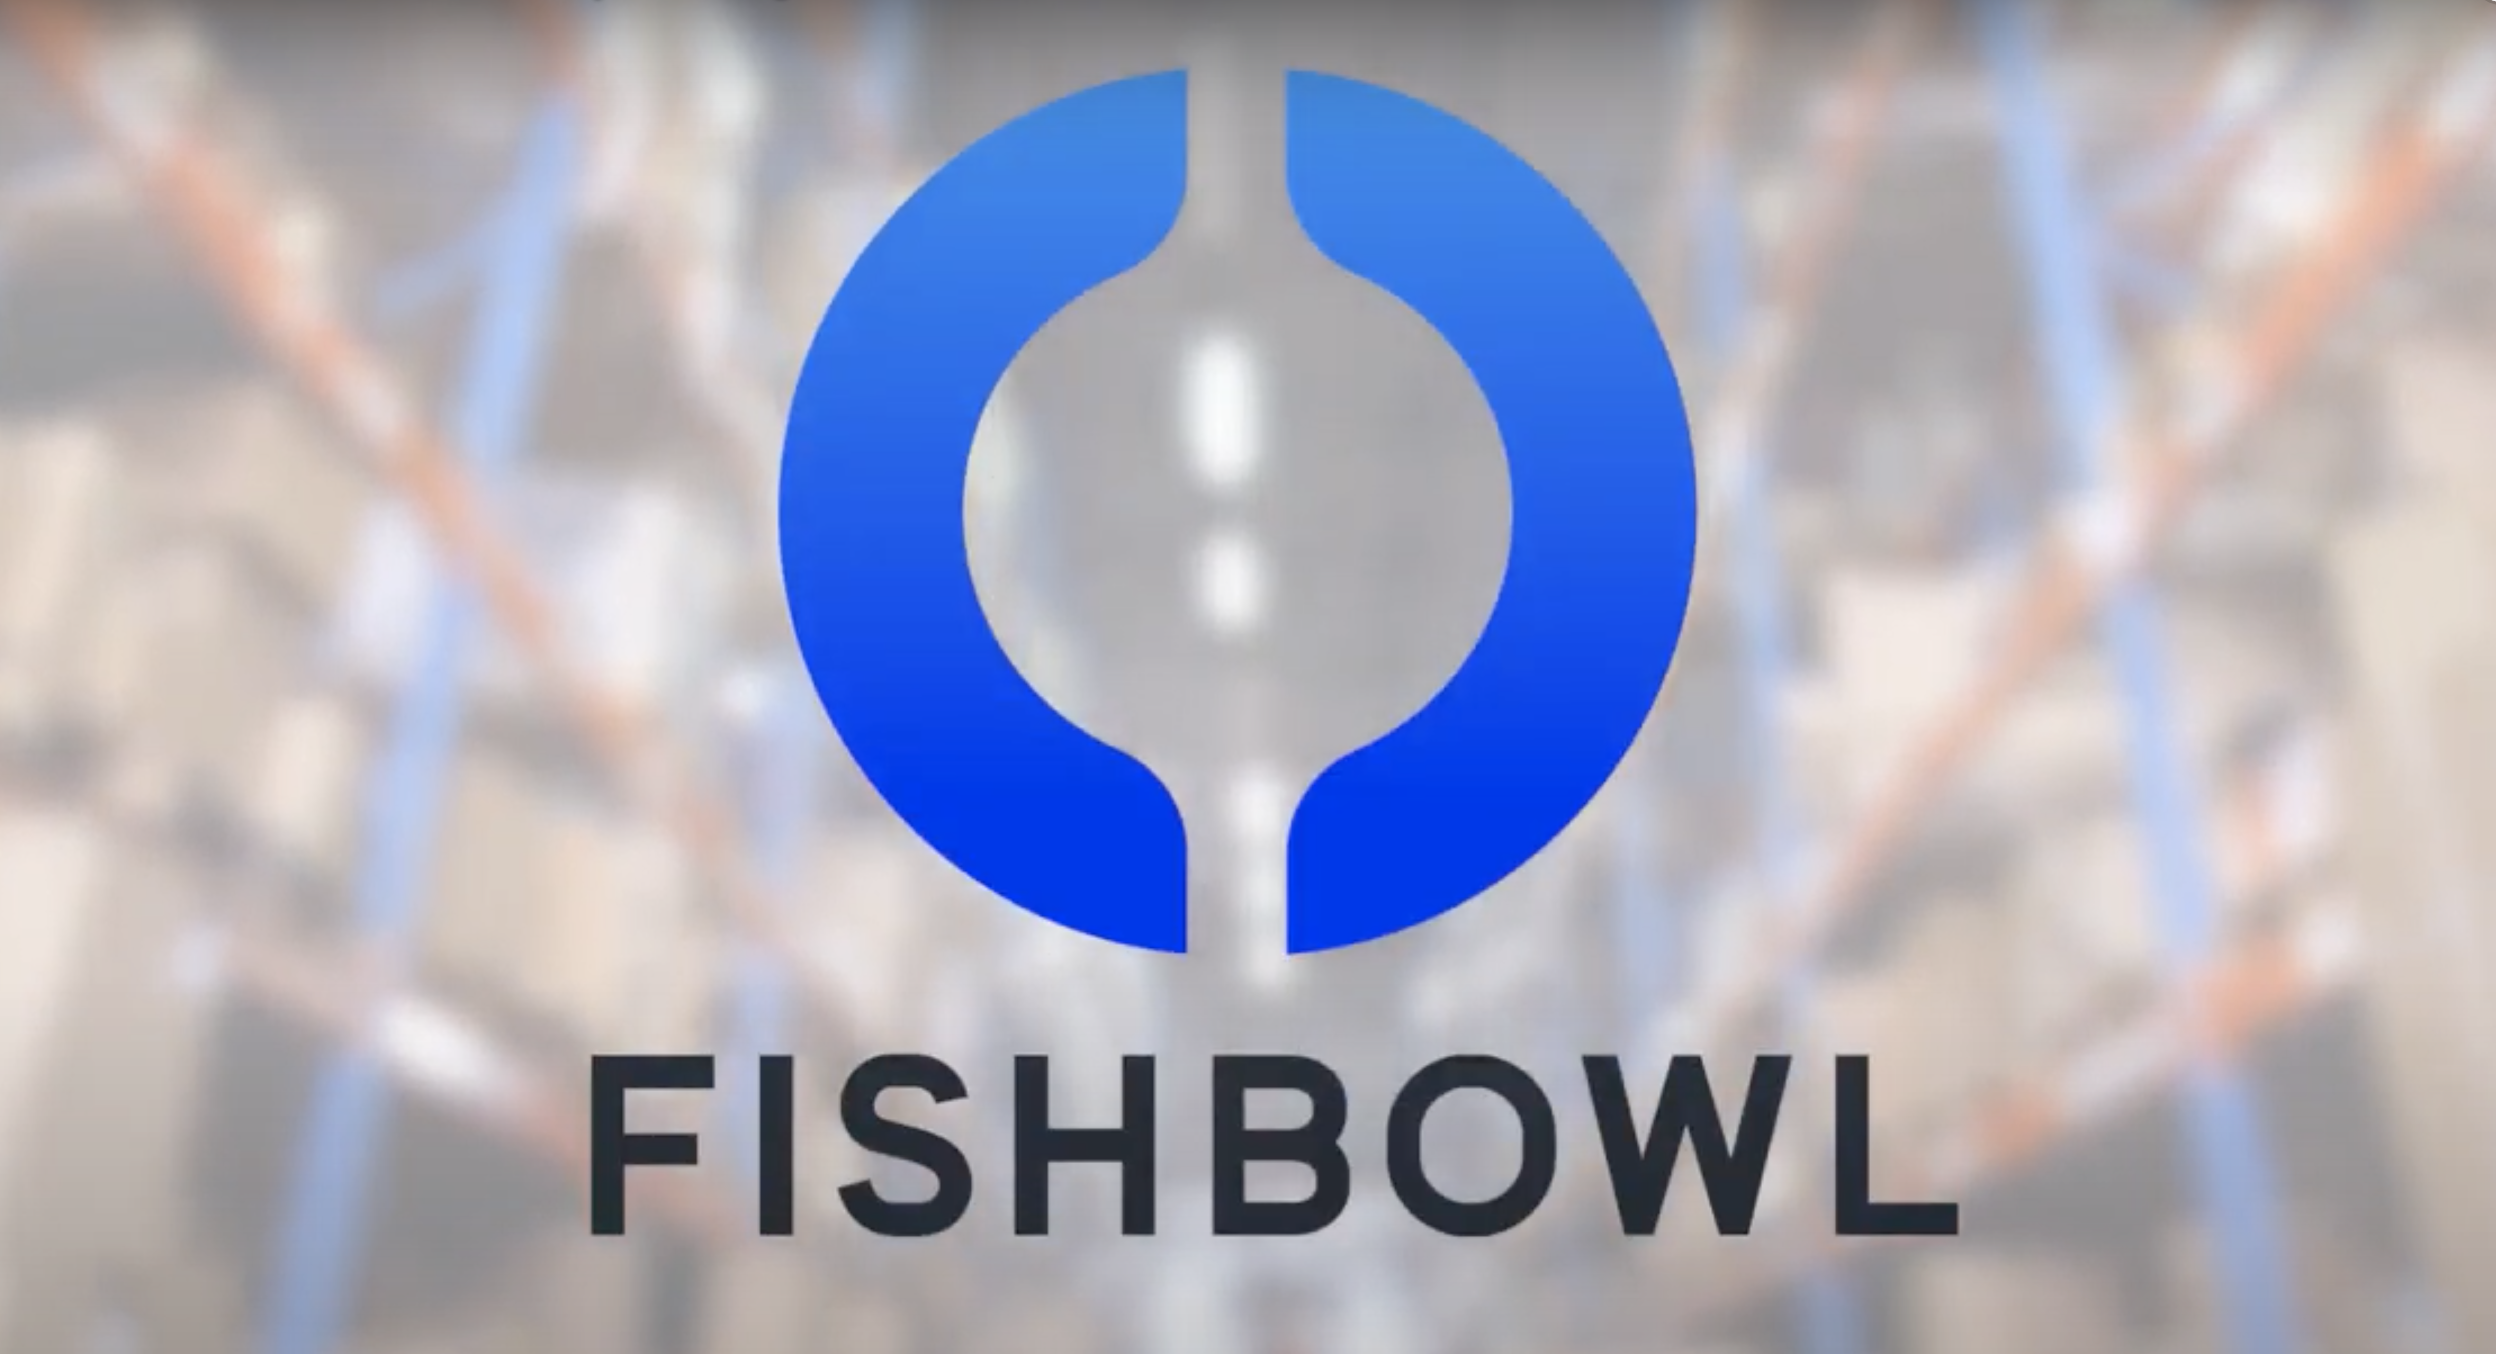 Fishbowl Manufacturing and Warehouse